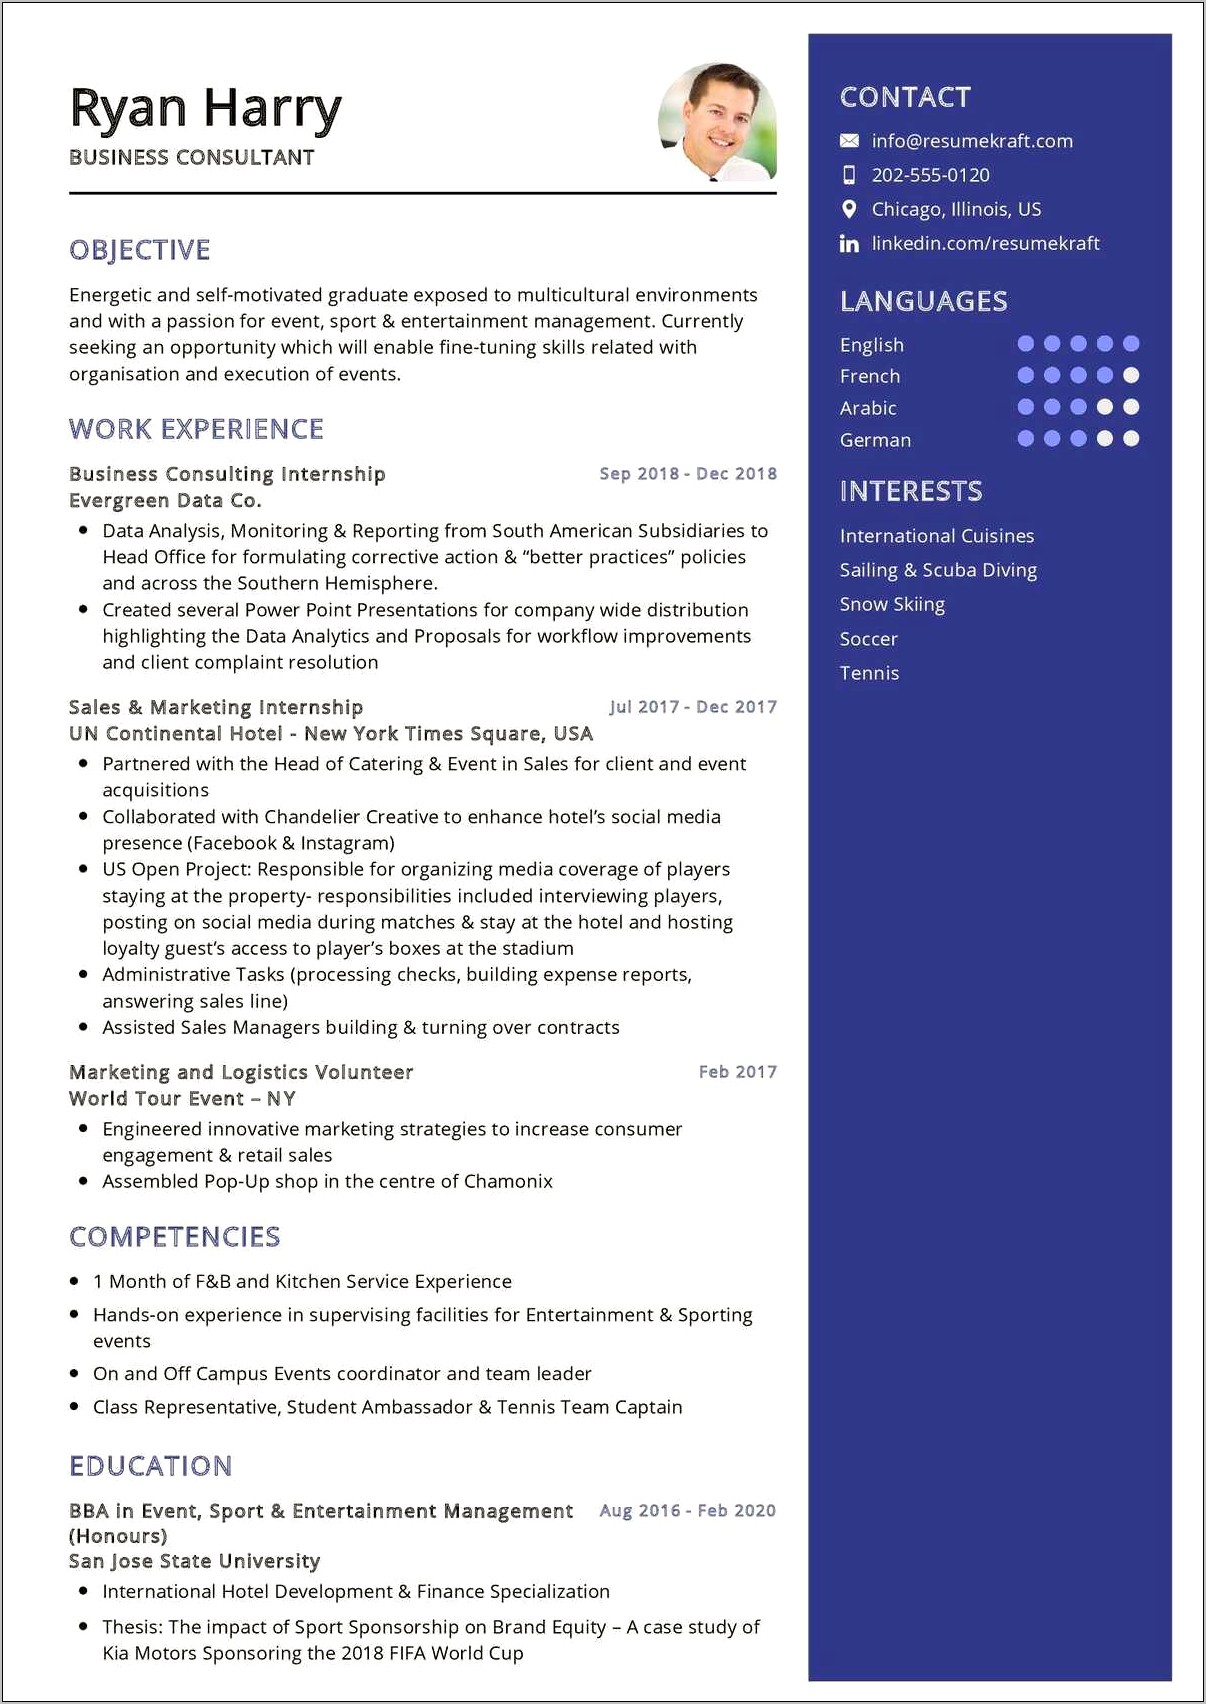 Example Resume From Experienced Consultant